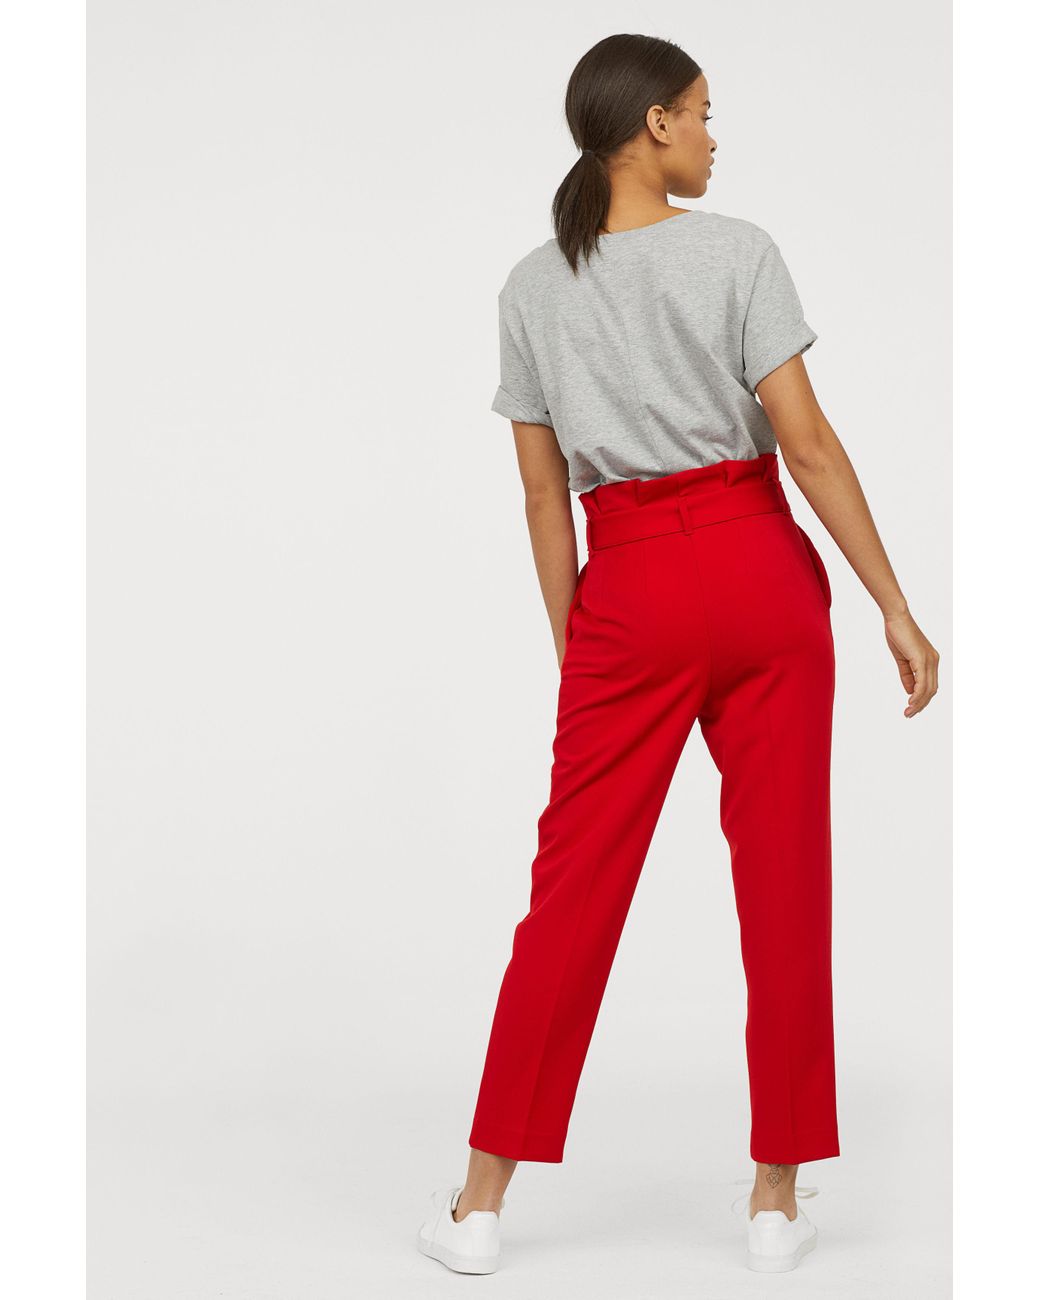 H&M Paper Bag Trousers in Red Lyst